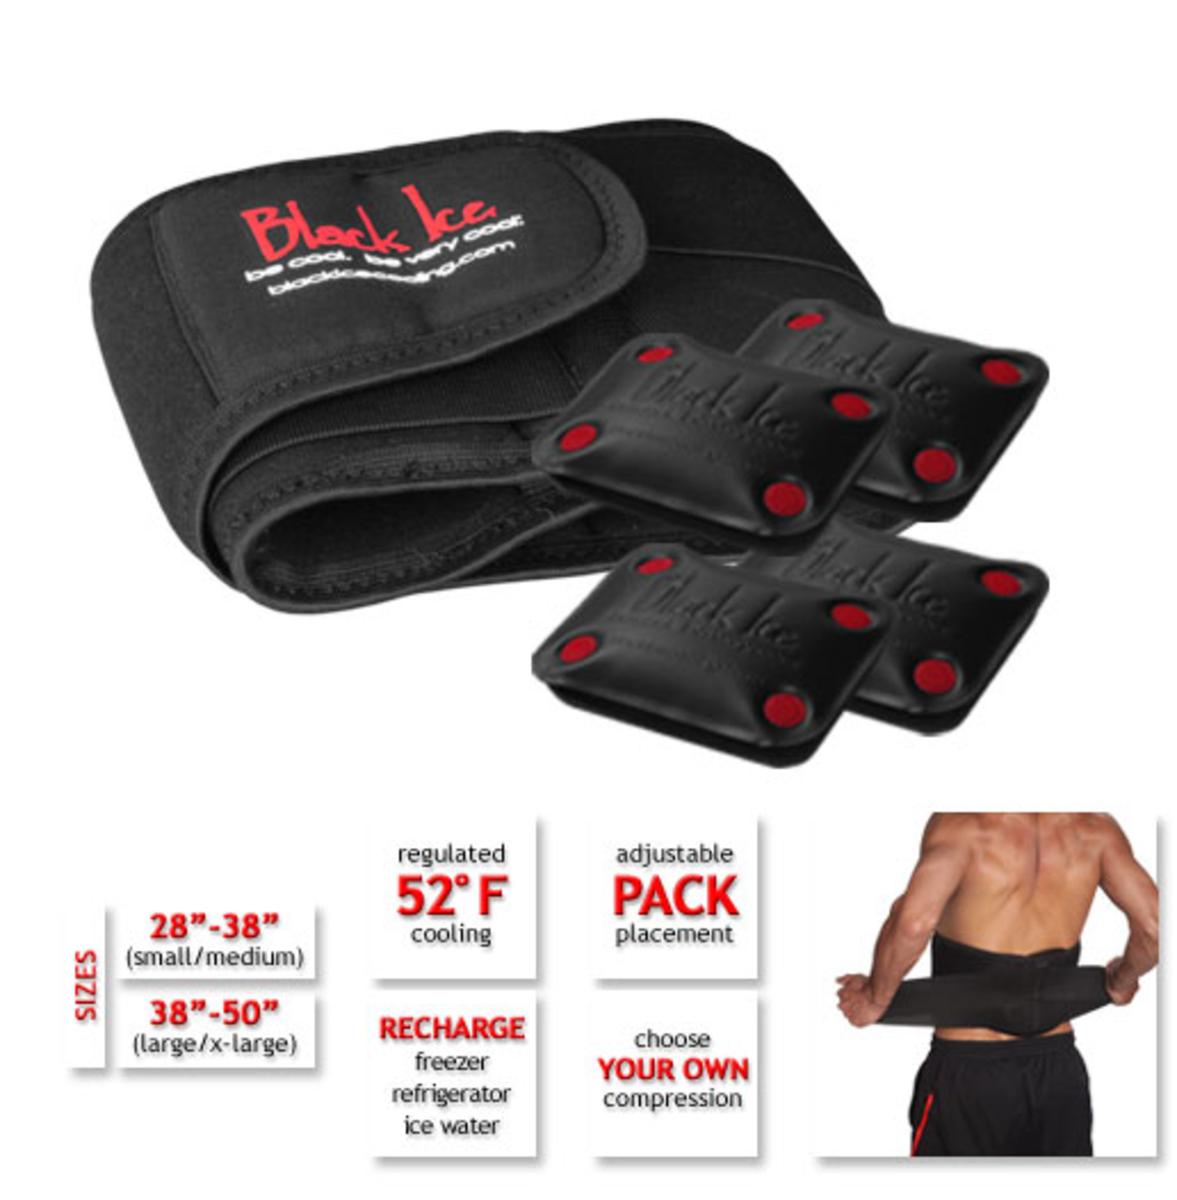 Black Ice CoolTherapy System - Back Wrap (4 Pack)